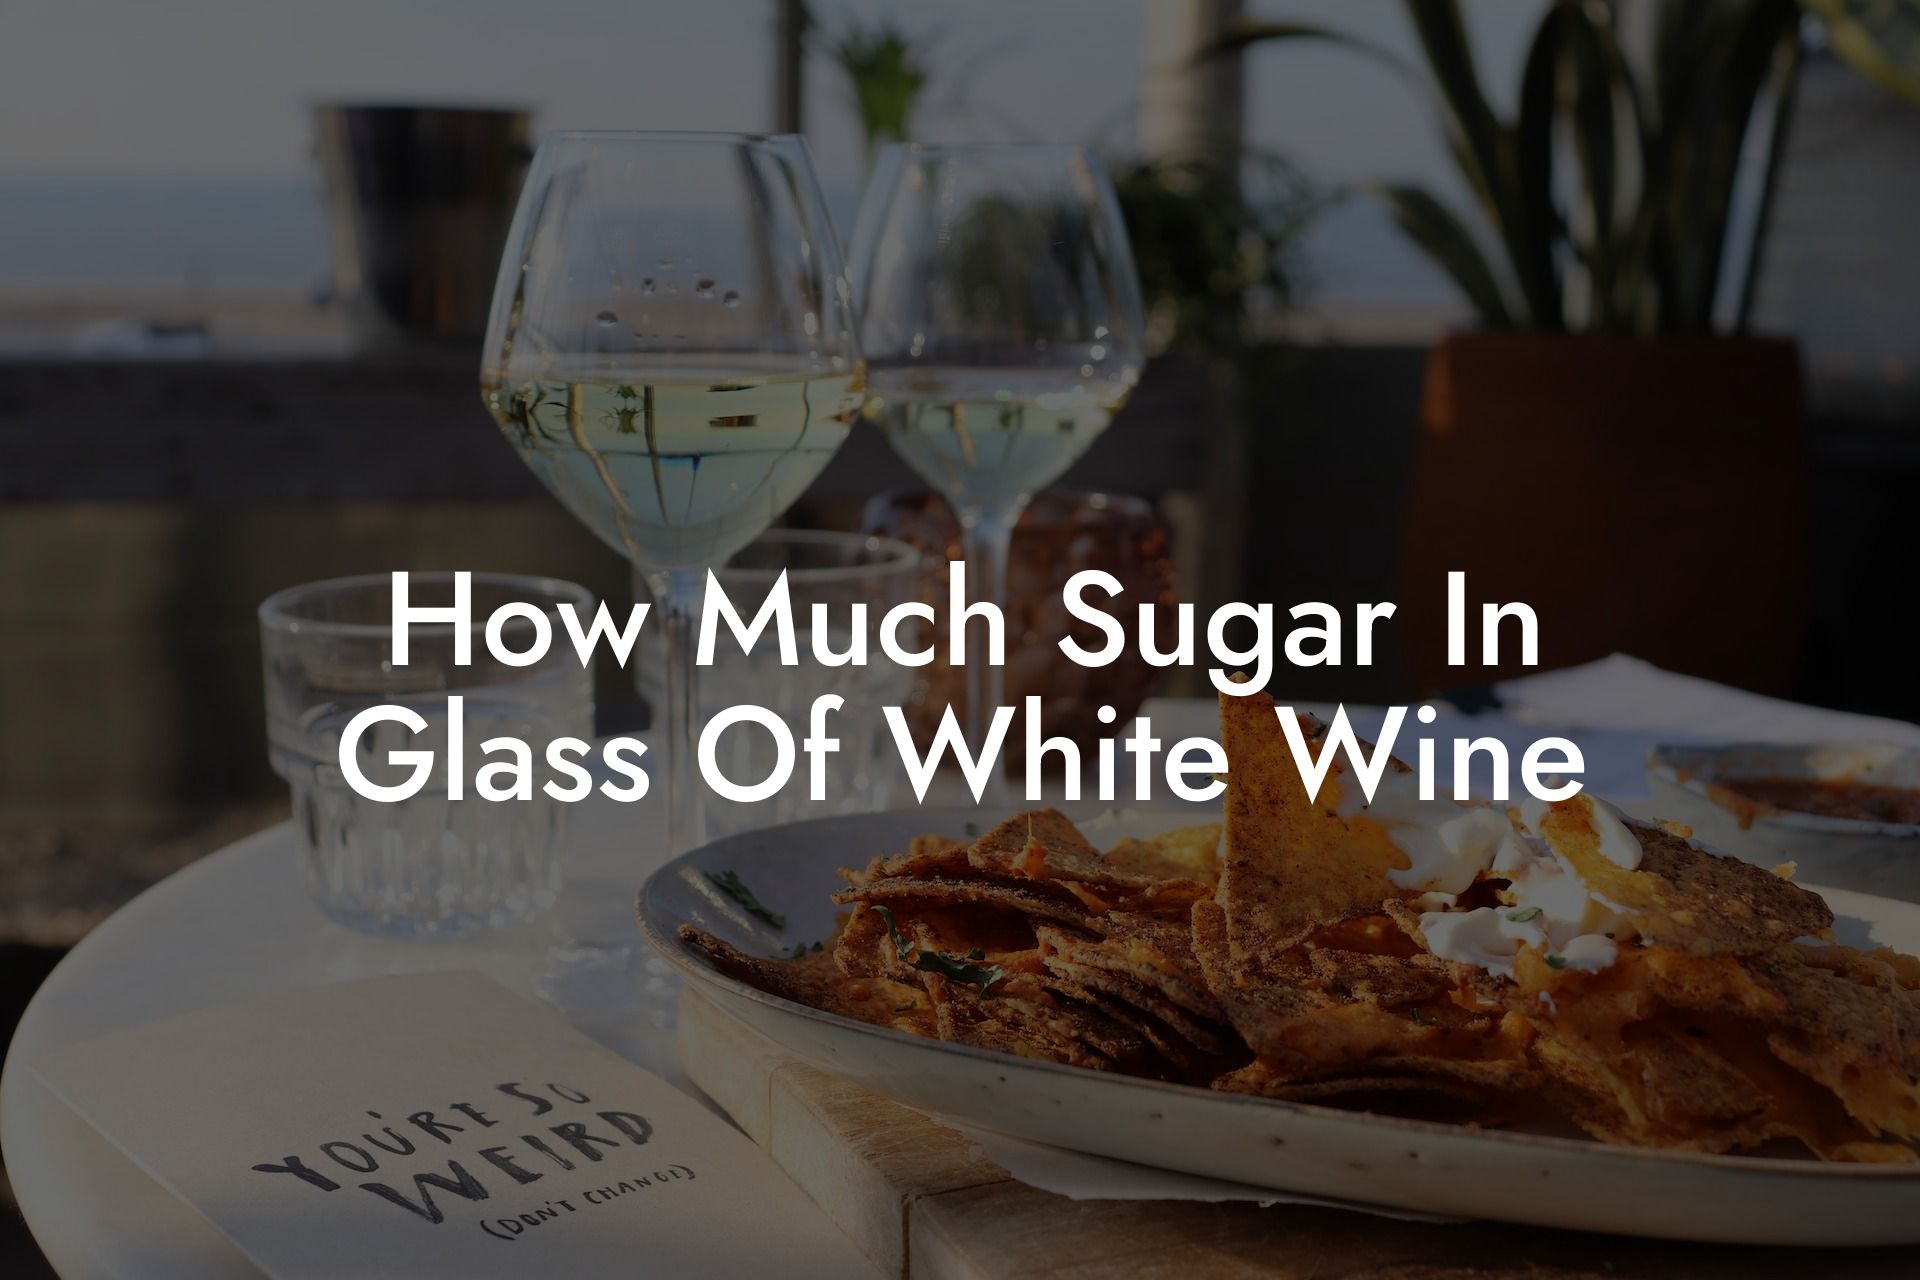 How Much Sugar In Glass Of White Wine